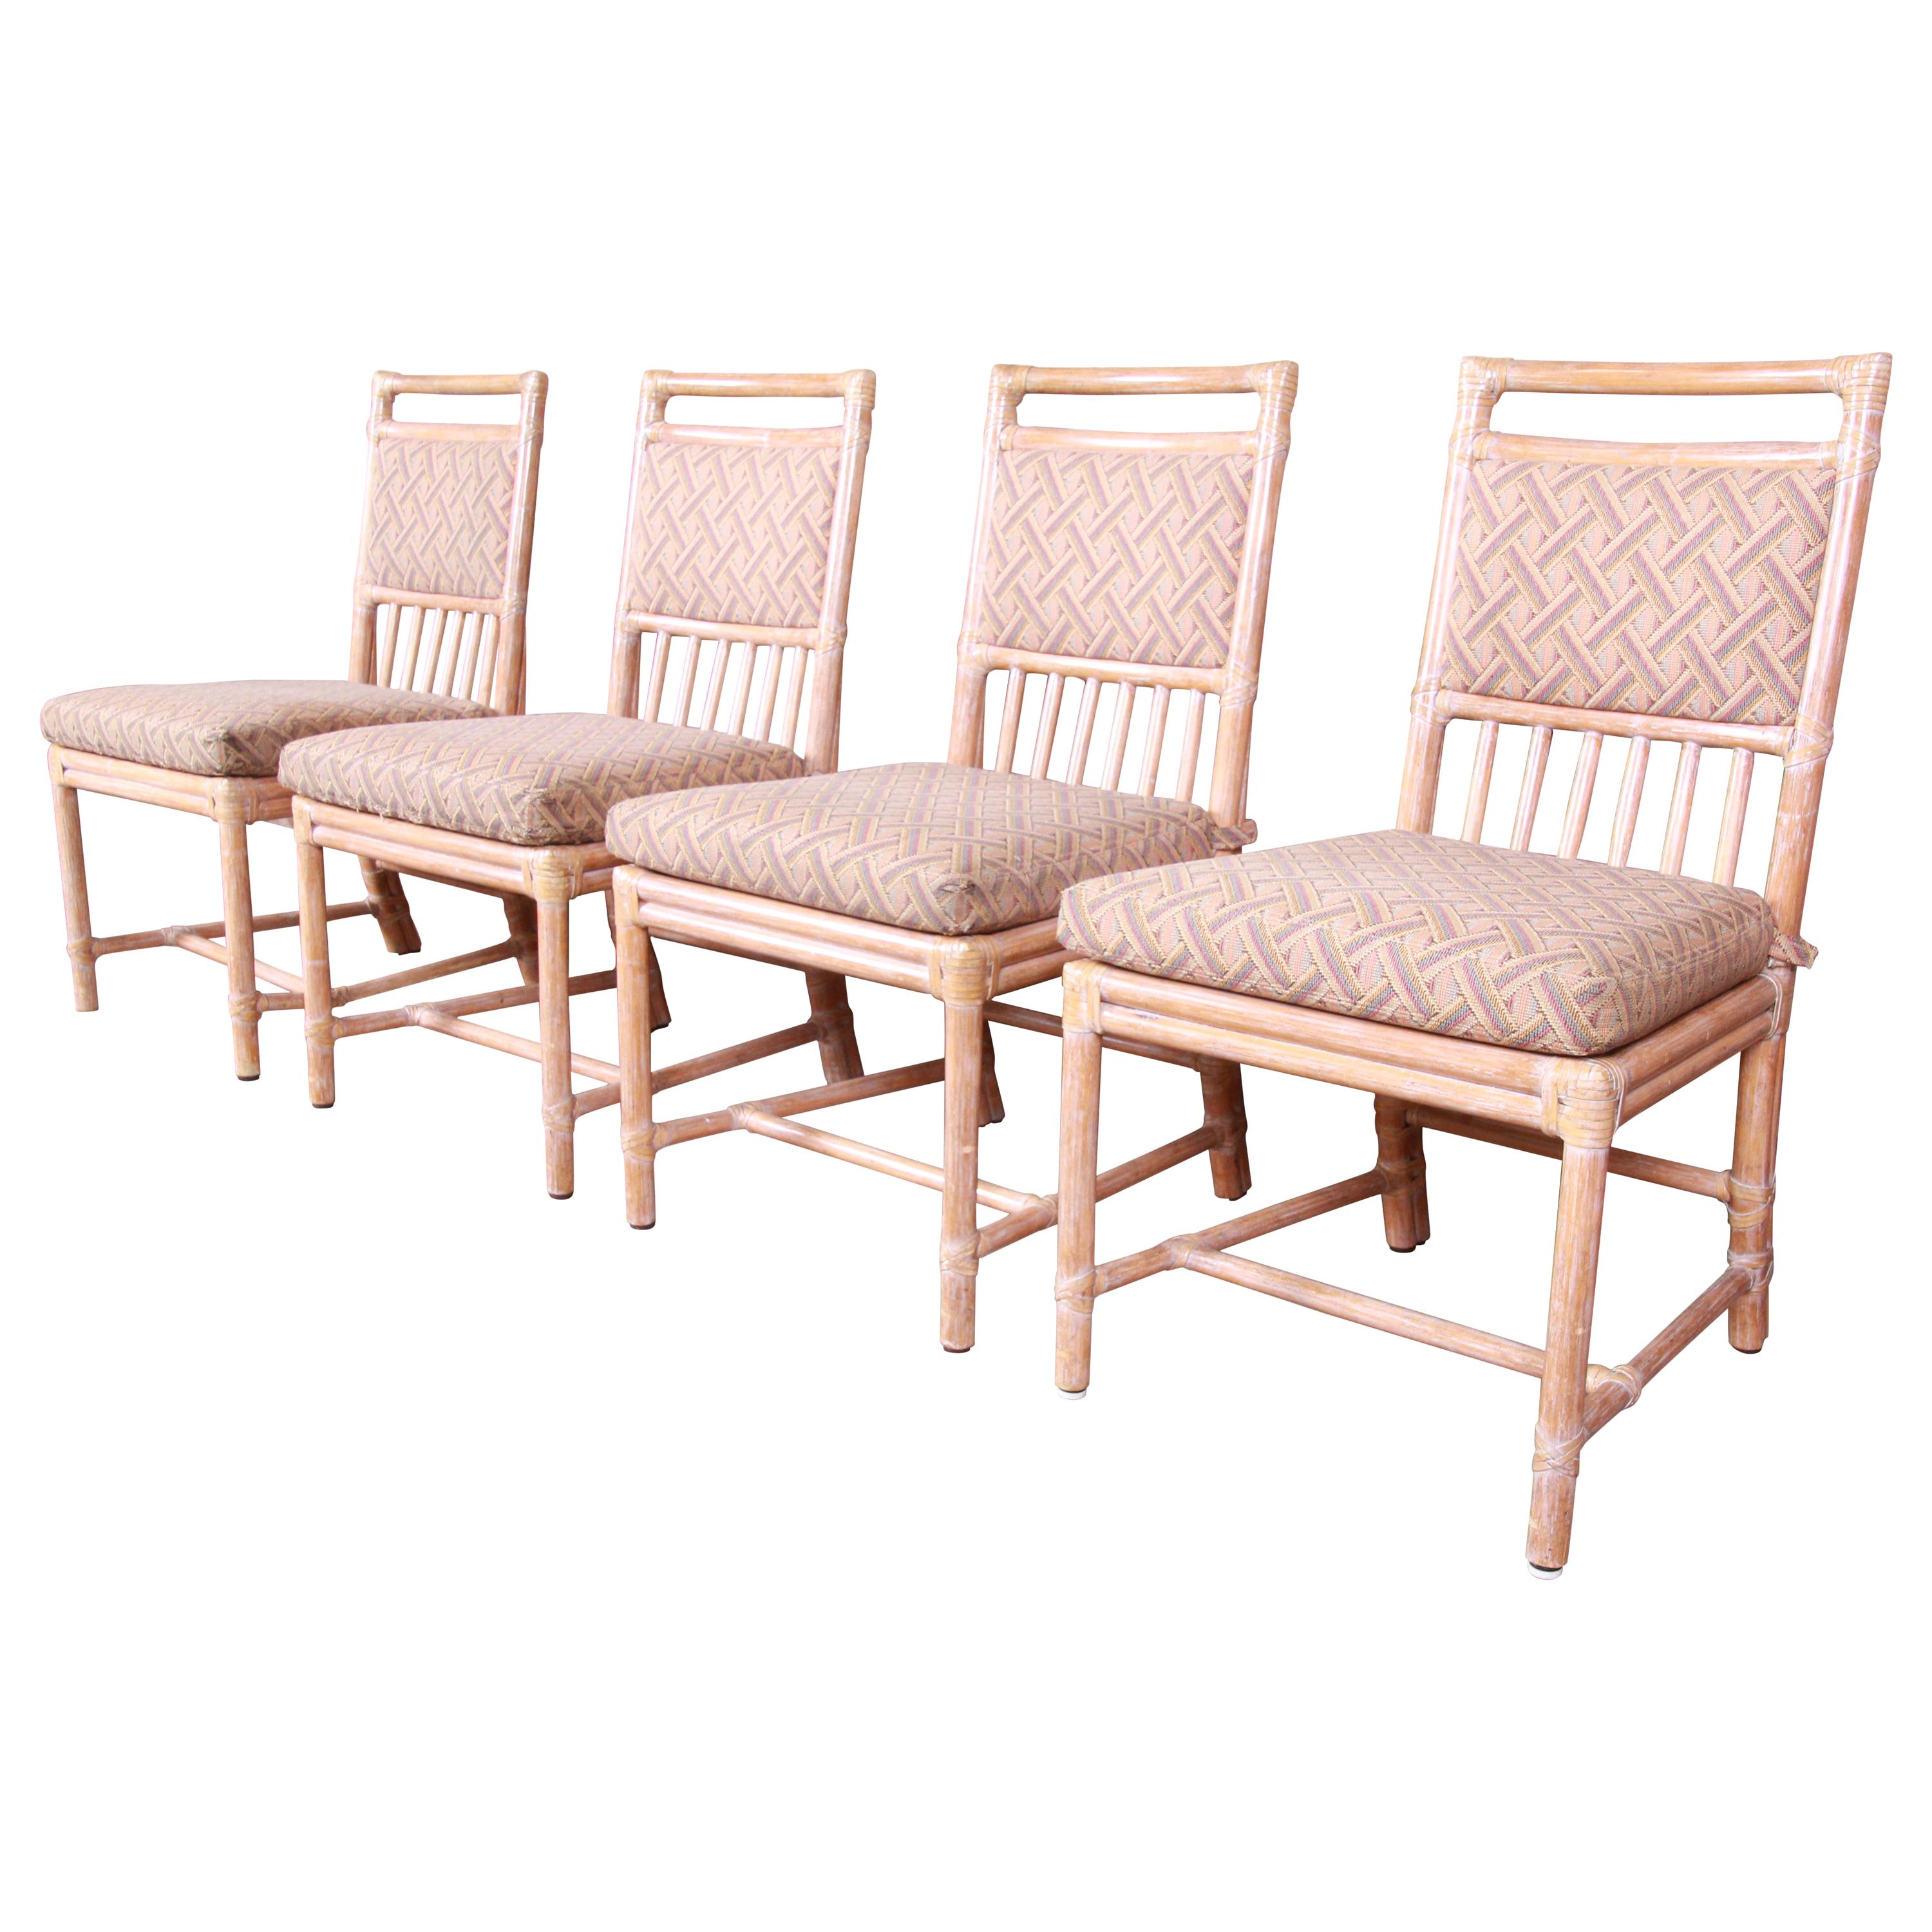 McGuire Midcentury Hollywood Regency Bamboo Rattan Dining Chairs, Set of Four